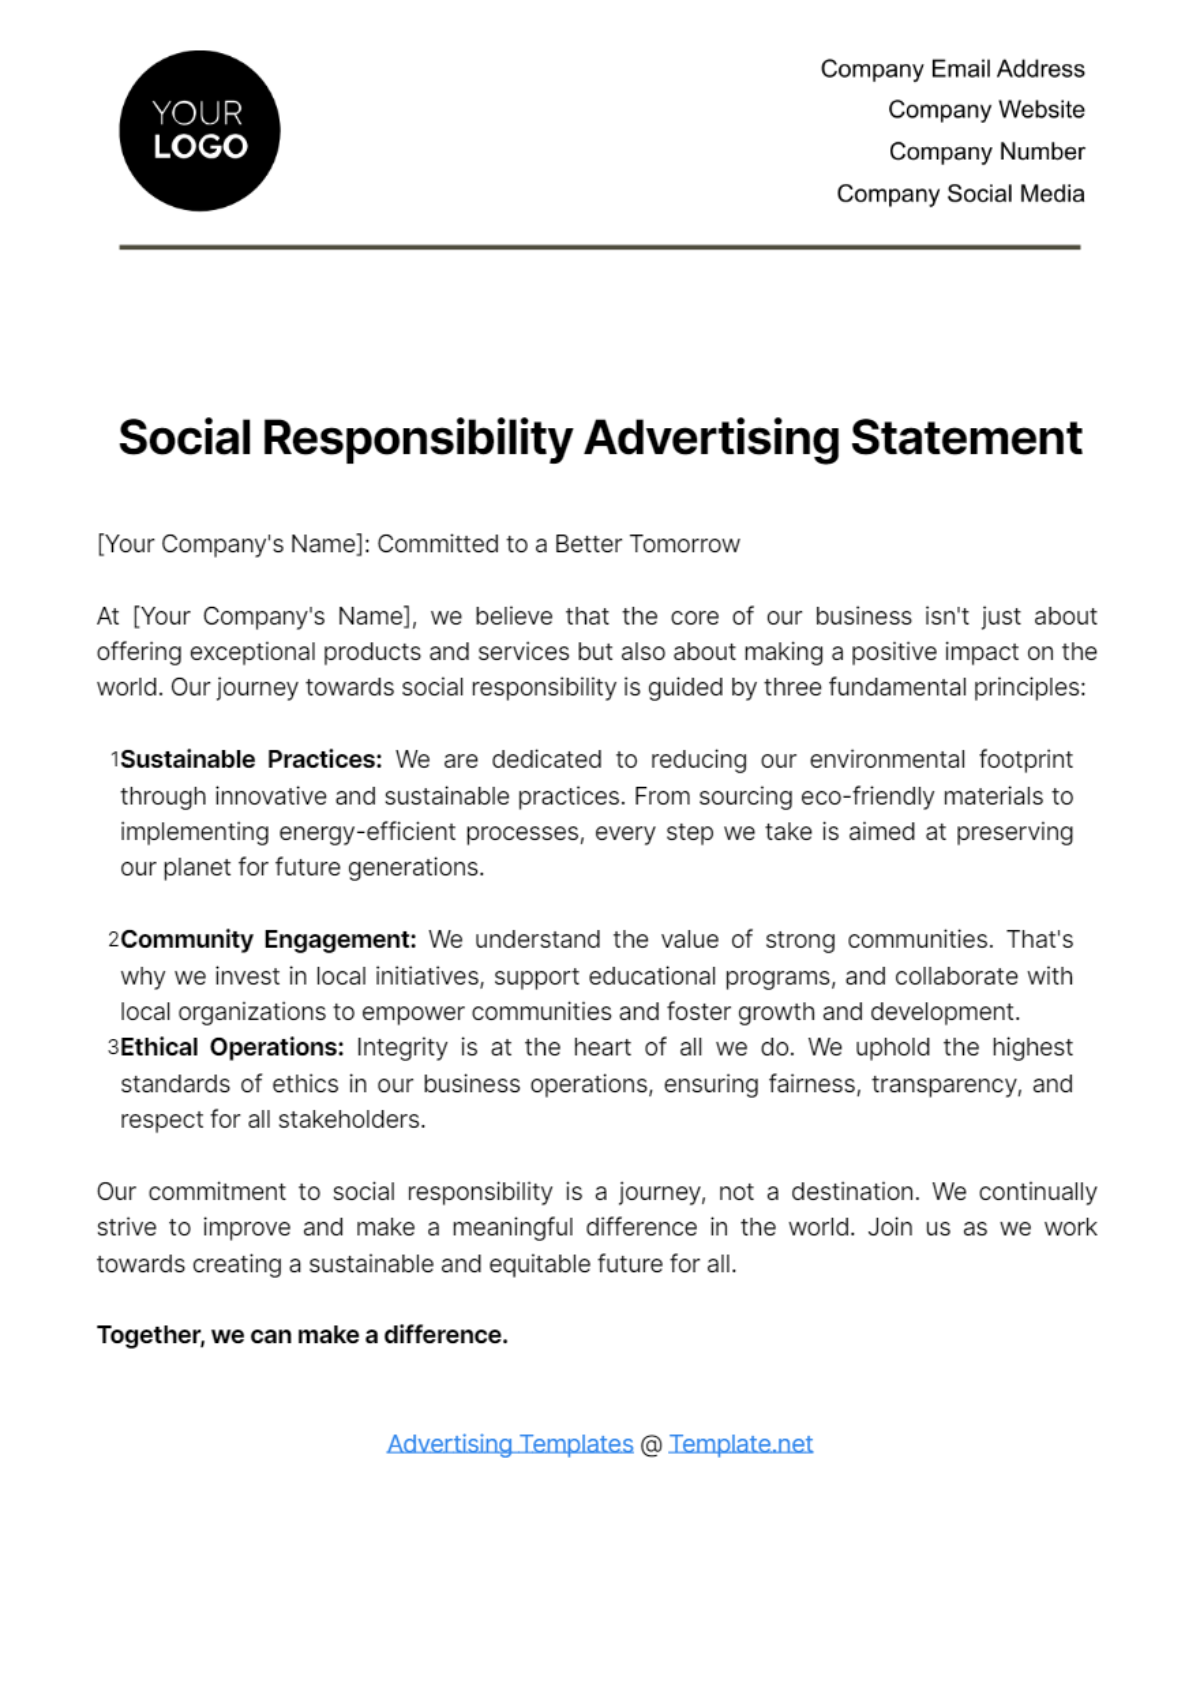 Free Social Responsibility Advertising Statement Template